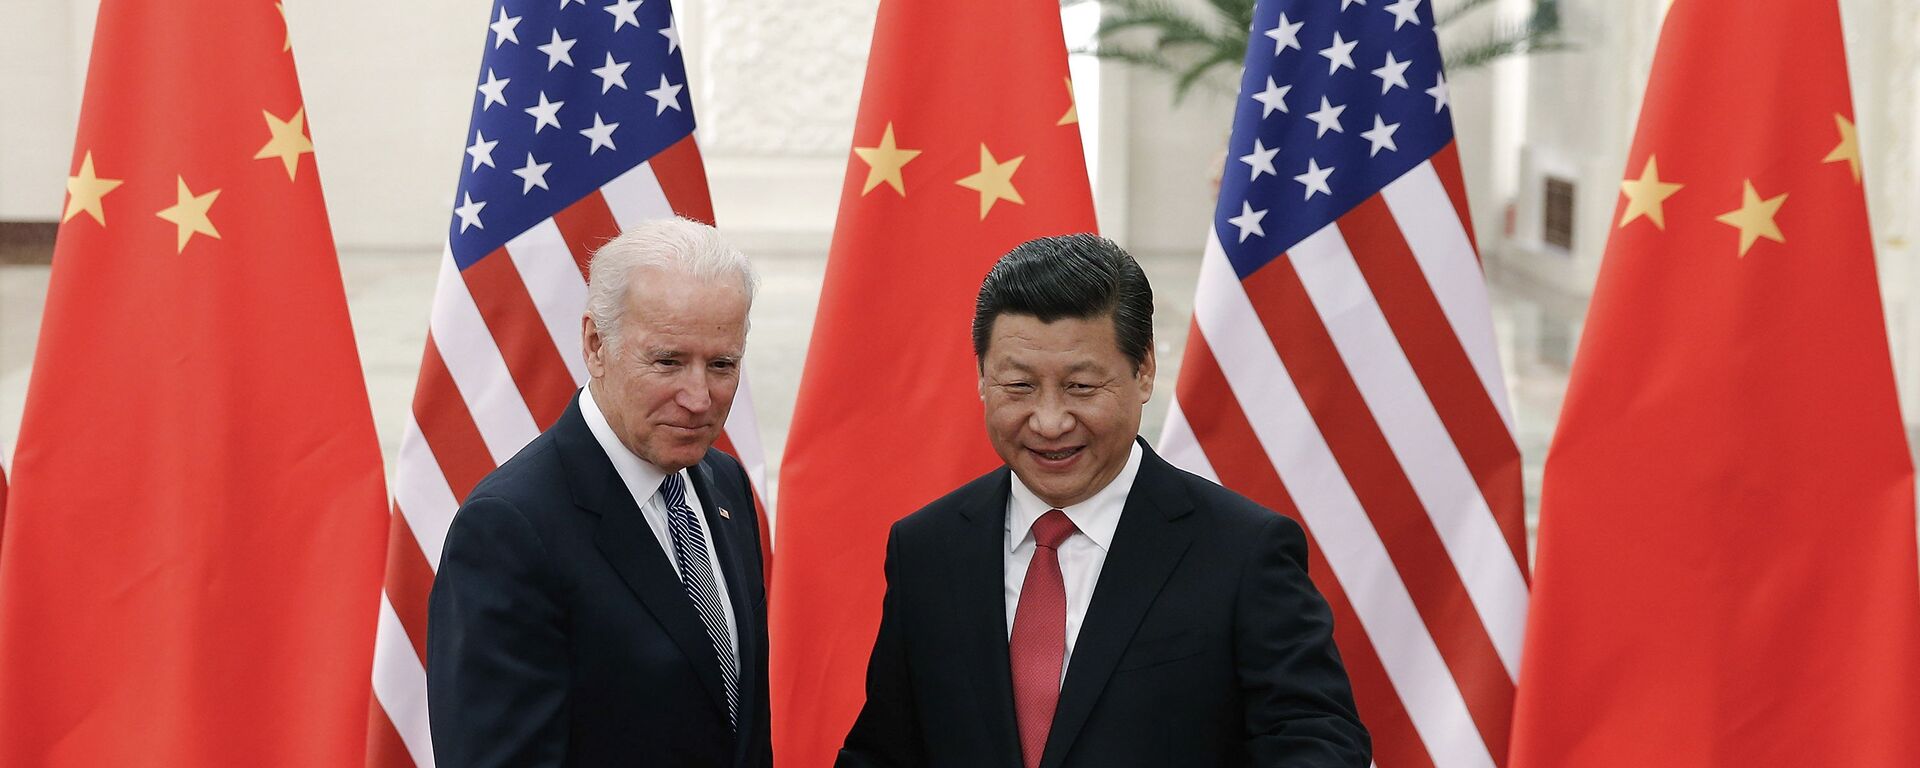 FILE - In this Dec. 4, 2013, file photo, Chinese President Xi Jinping, right, shakes hands with then U.S. Vice President Joe Biden as they pose for photos at the Great Hall of the People in Beijing. - Sputnik International, 1920, 28.07.2022